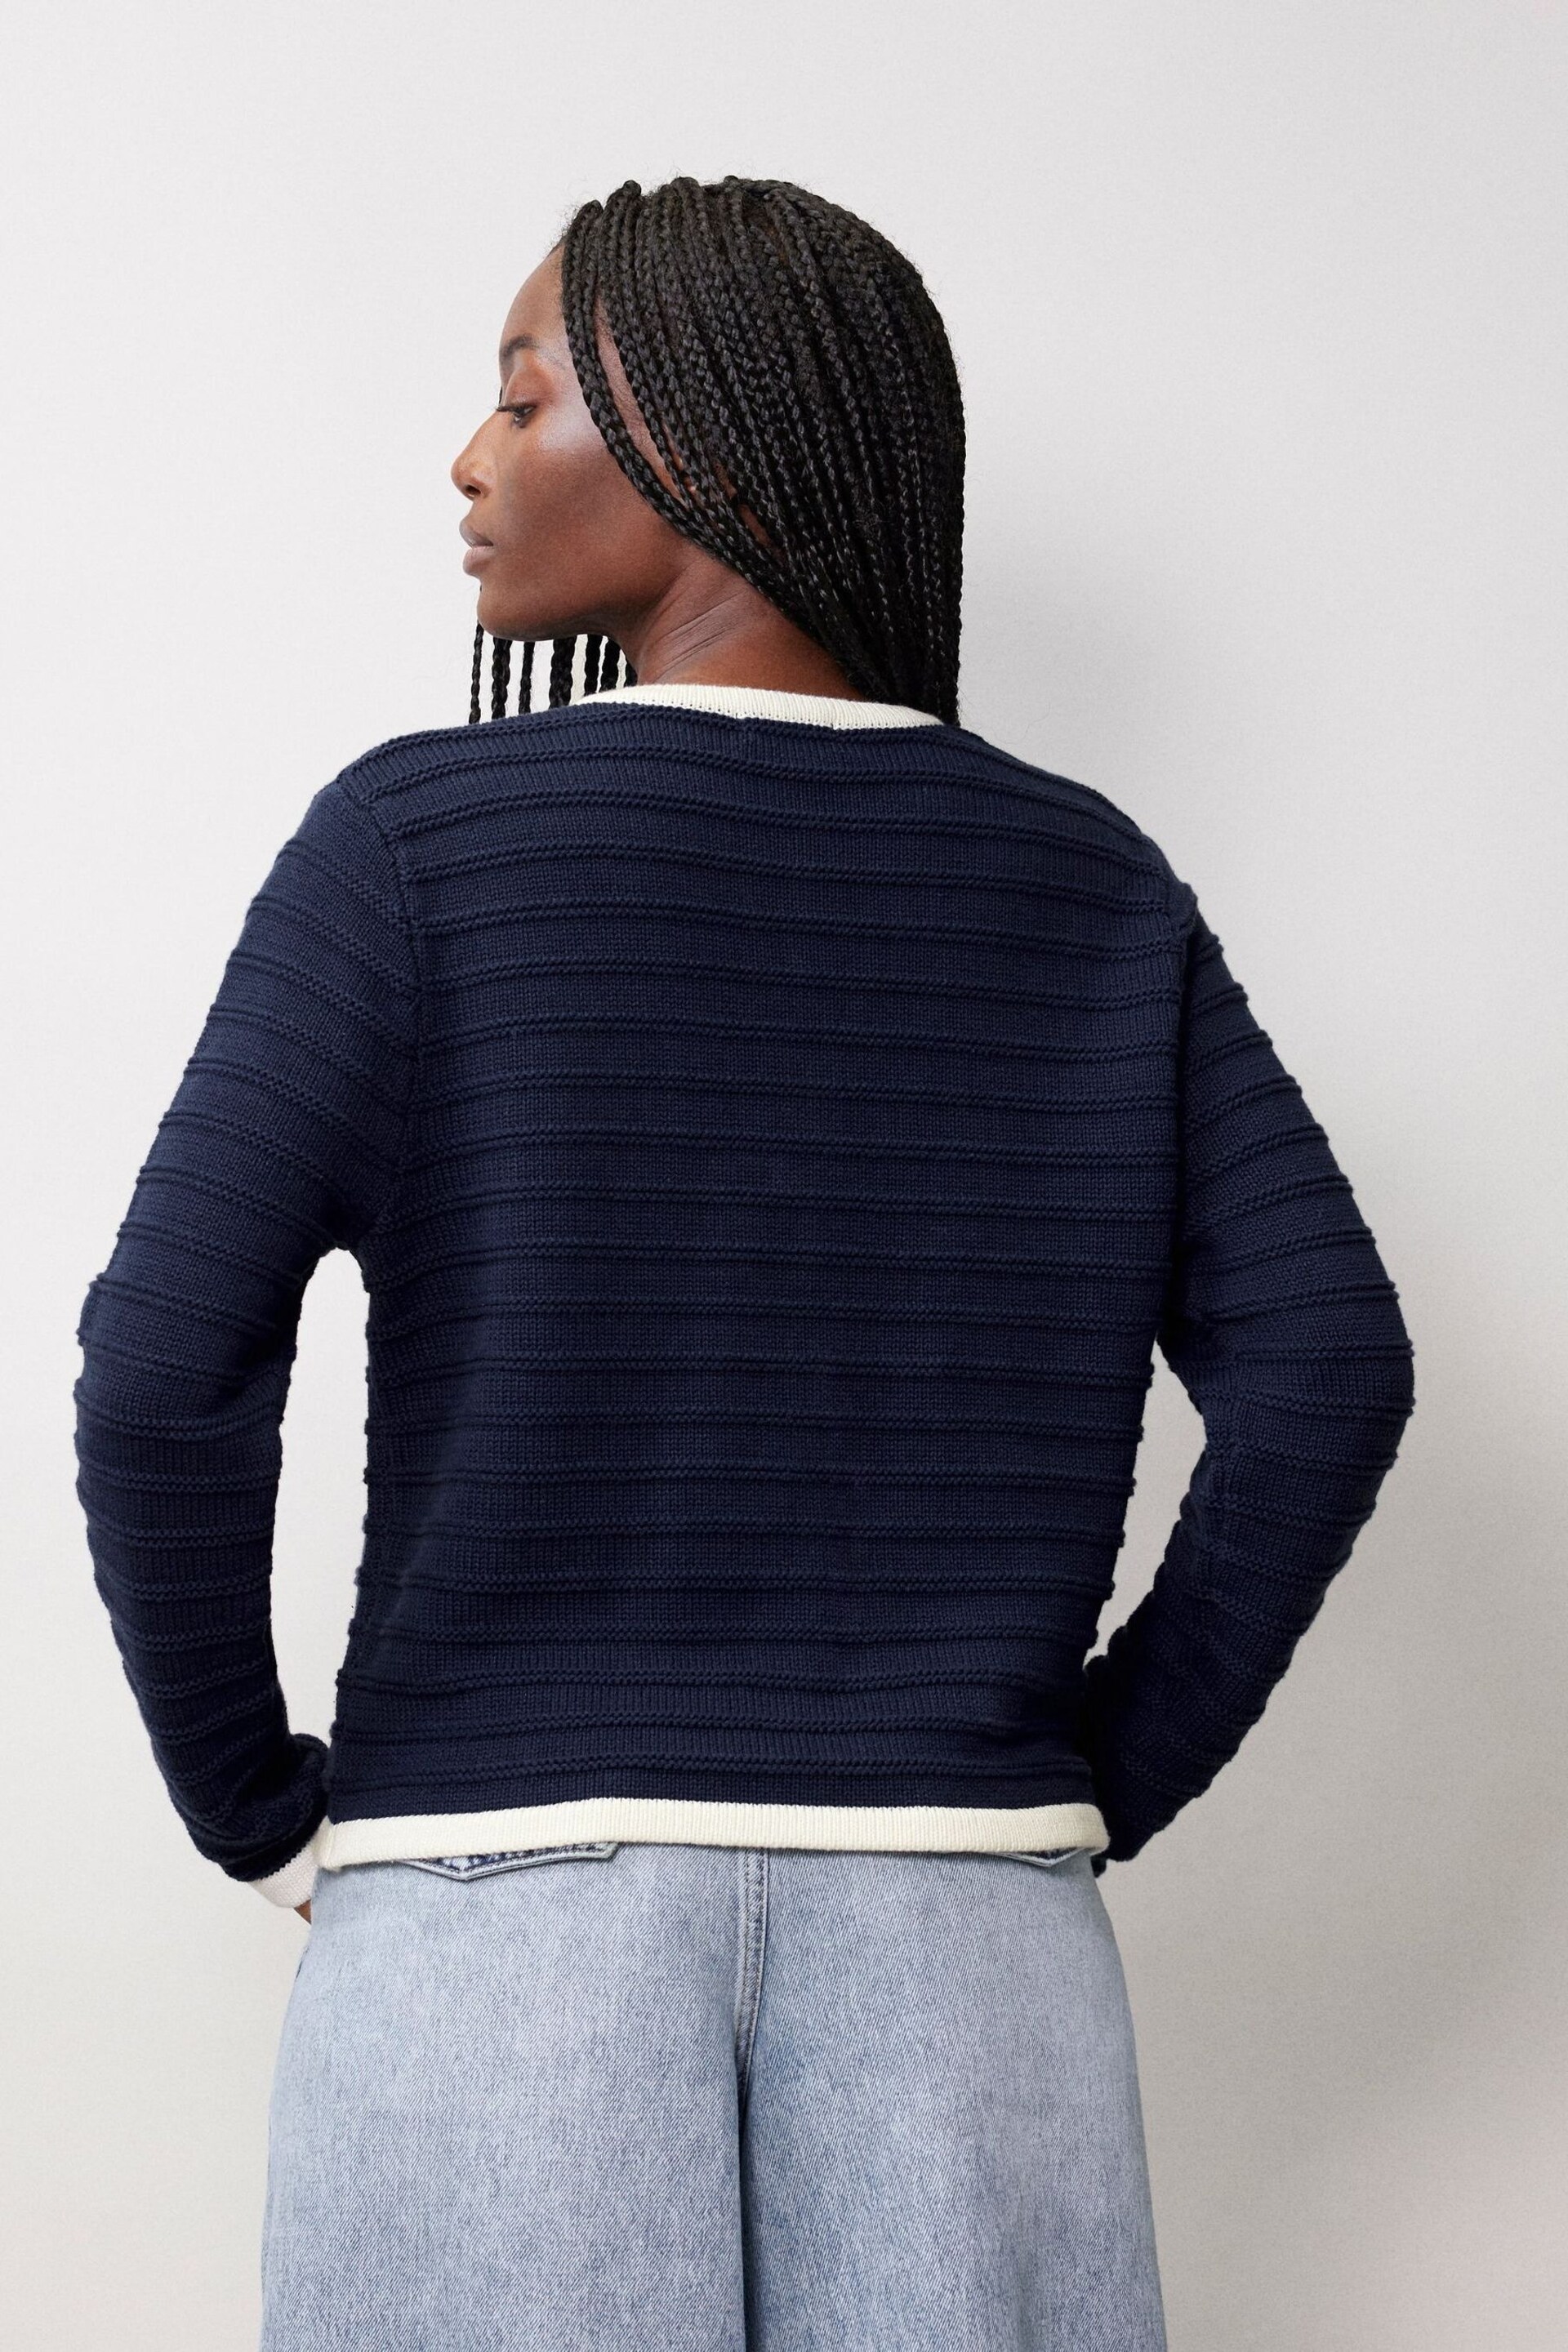 Albaray Blue Knitted Contrast Trim Cardigan - Image 2 of 4